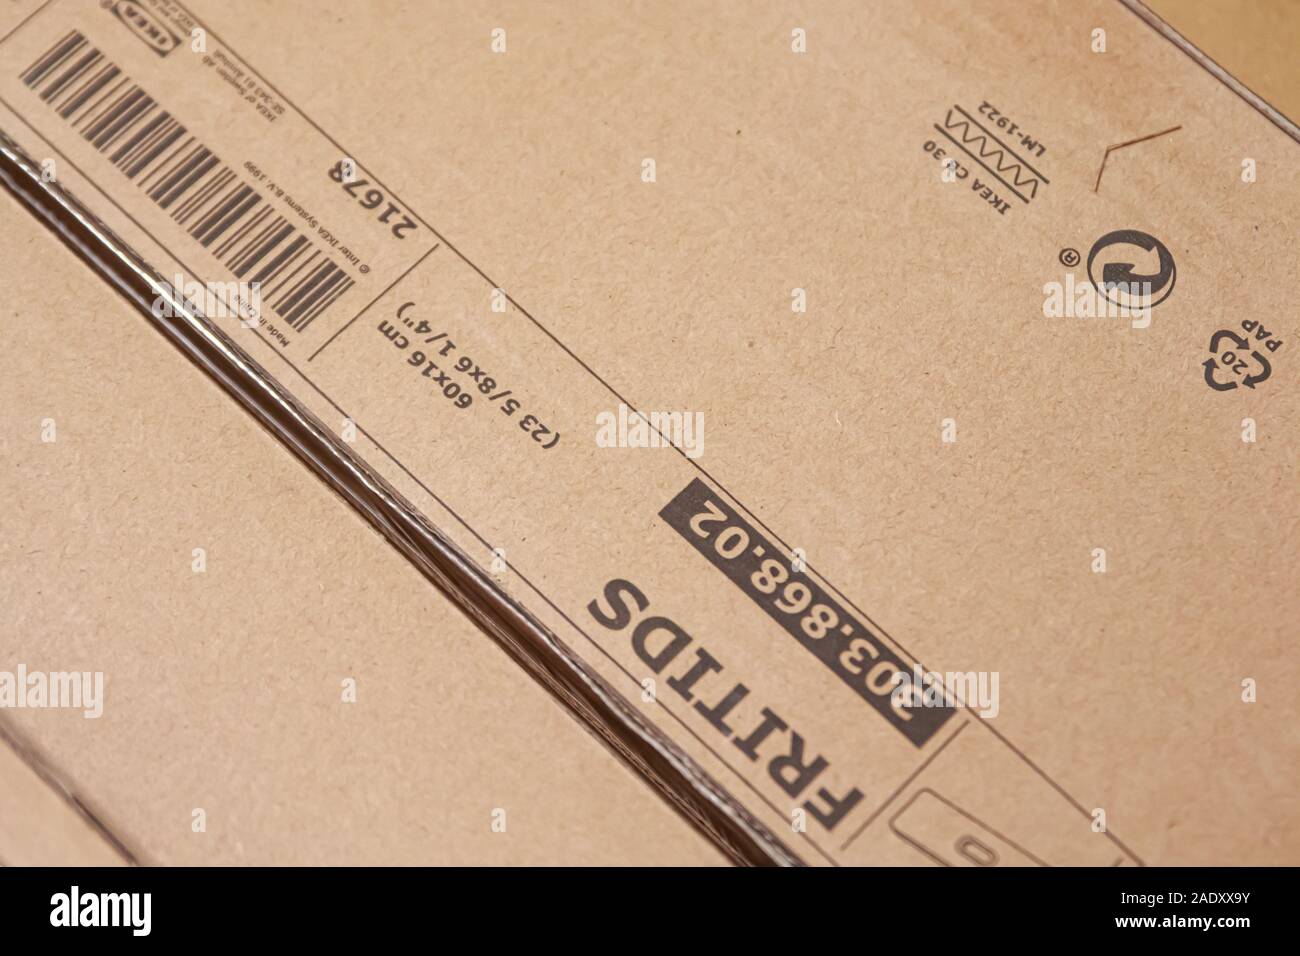 Pile of IKEA furniture cardboard box to be assembled Stock Photo - Alamy